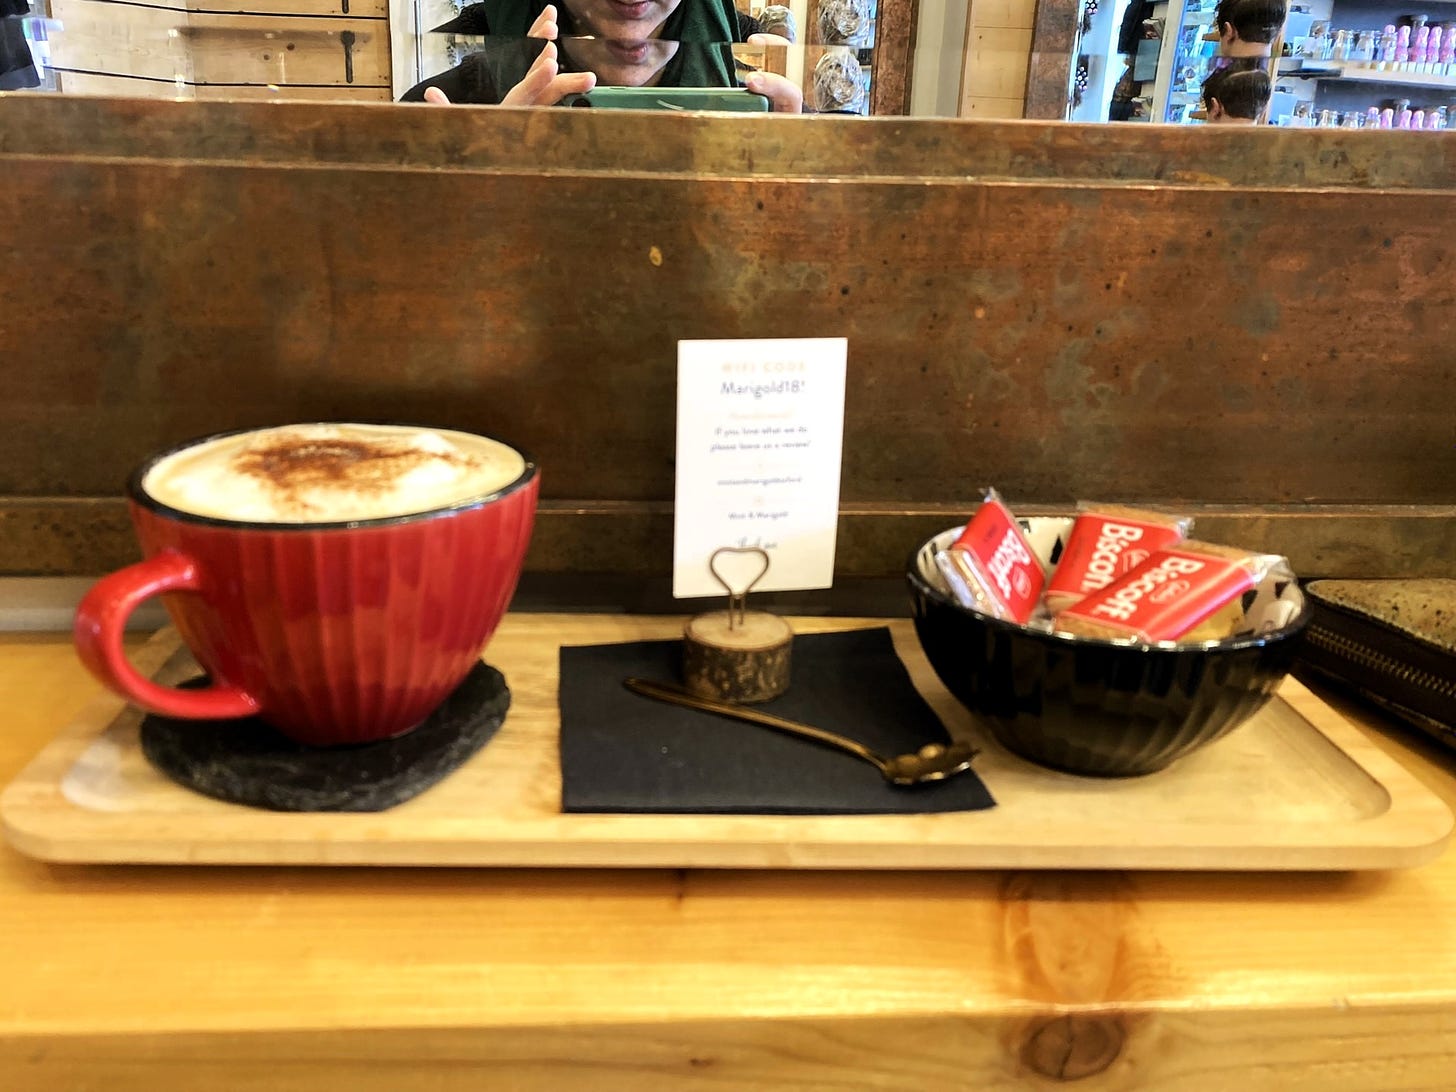 A large red mug contains a very frothy cappuccino. To the right is a black bowl containing biscoff biscuits. 